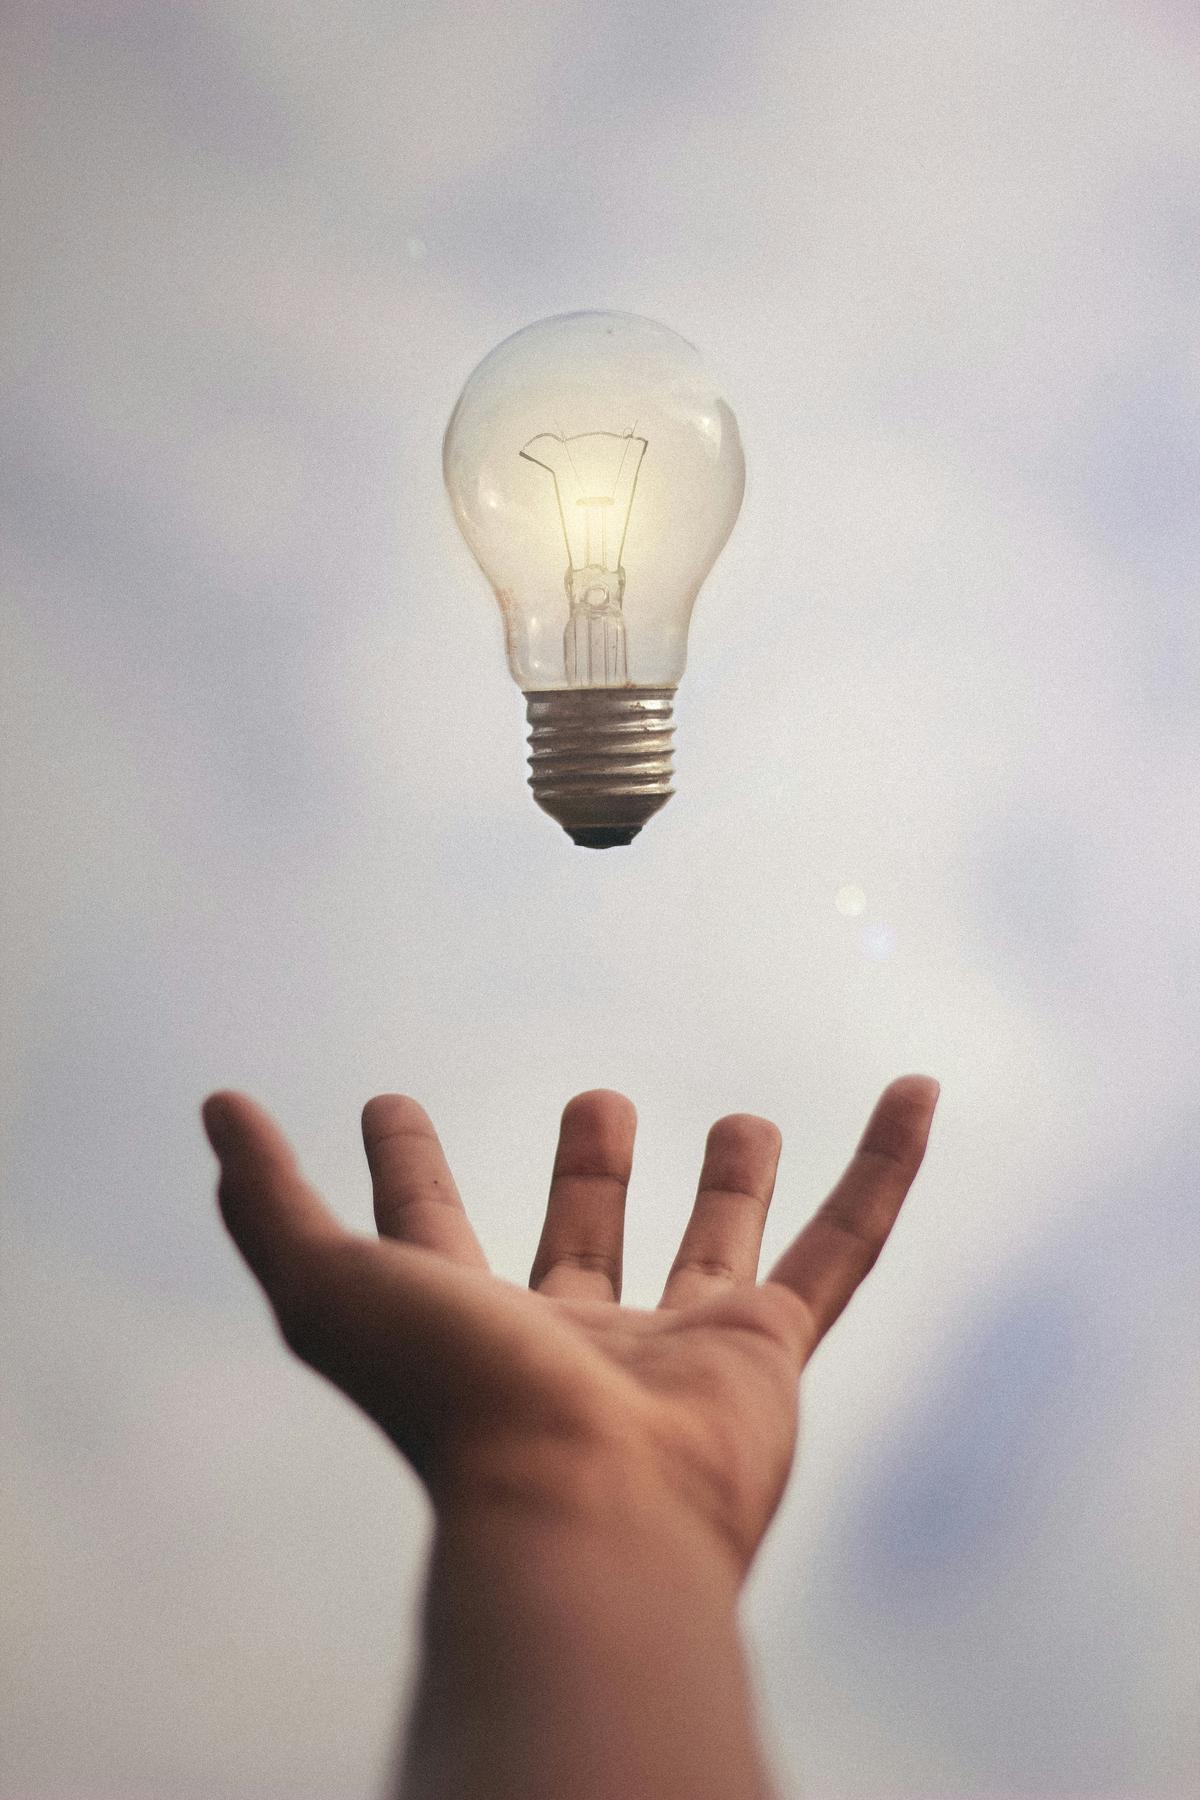 Illustration of a person with a thought bubble showing a lightbulb, representing intuition.